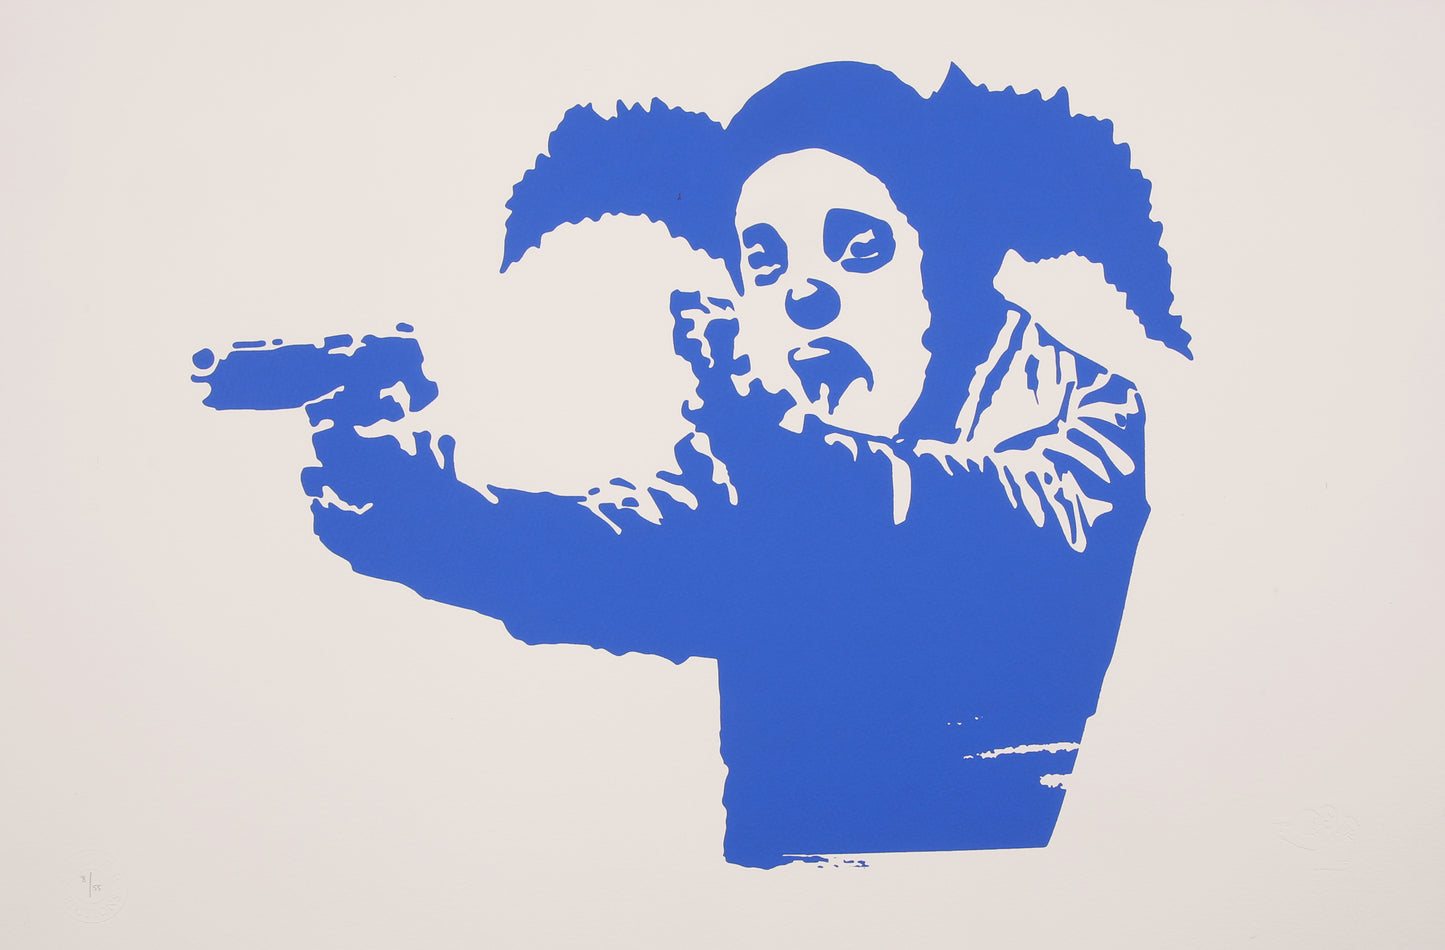 Banksy - Clown Skateboards - screen printed, certified and limited